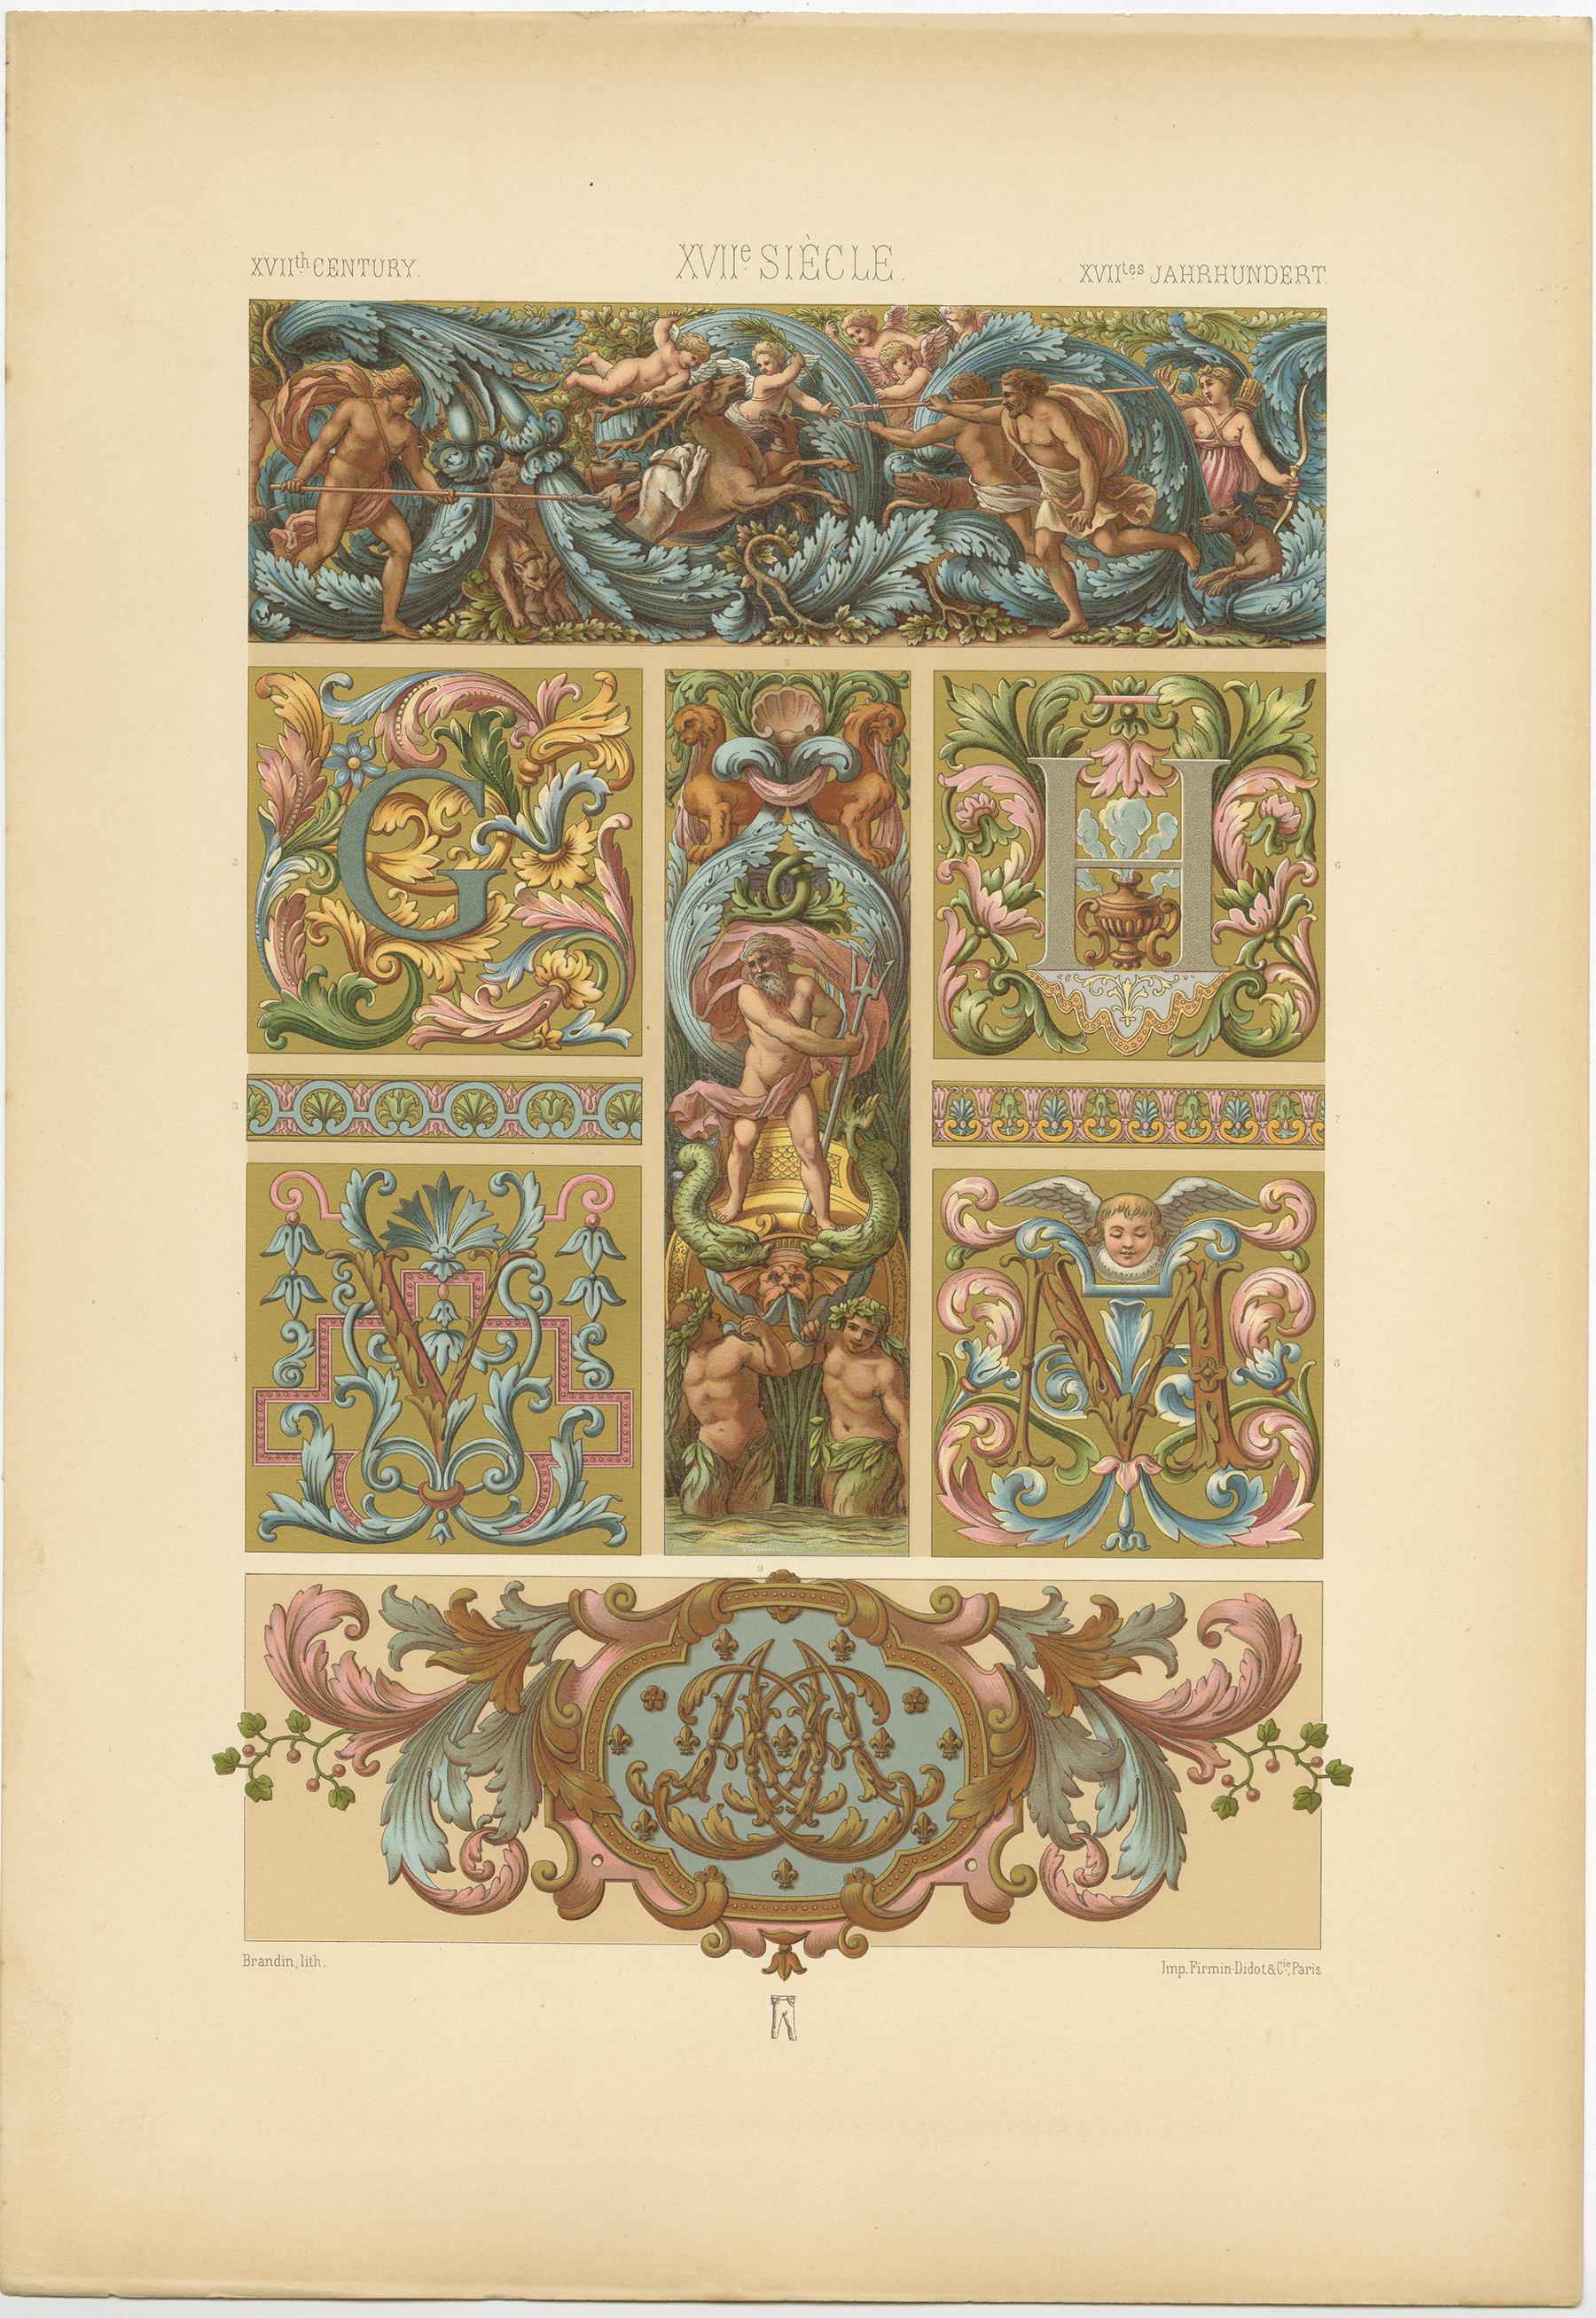 Antique print titled '17th Century - XVIIc Siècle - XVIILes Jahrhundert'. Chromolithograph of from interior décor and illuminated choir books, France ornaments. This print originates from 'l'Ornement Polychrome' by Auguste Racinet. Published circa